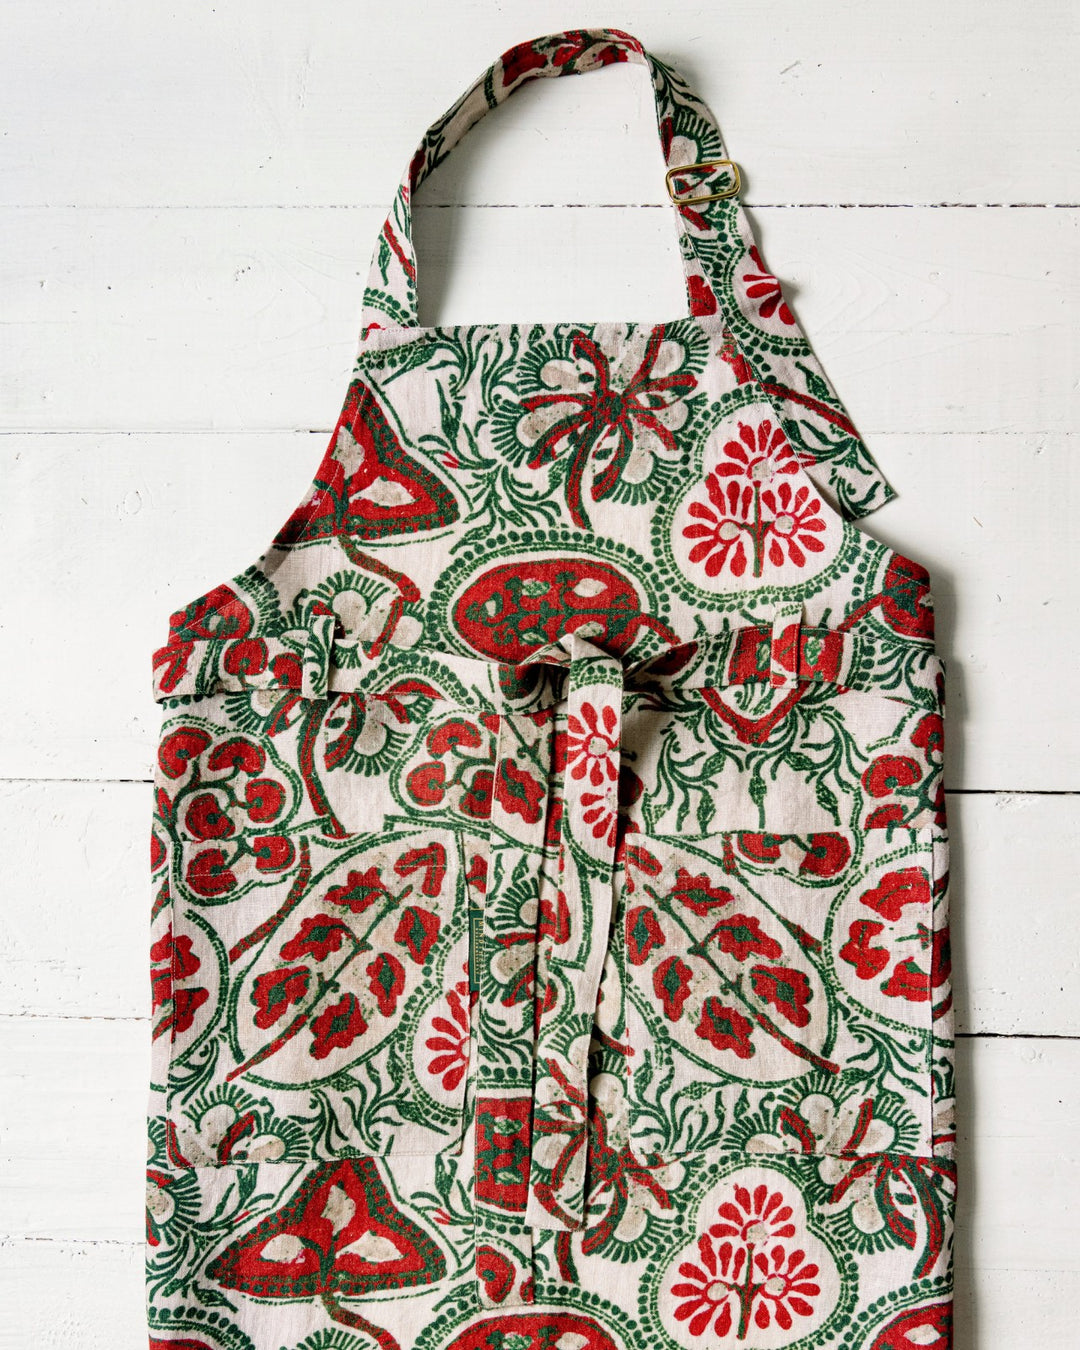 mind-the-gap-heirloom-linen-printed-stonewashed-linen-craft-print -luxury-apron-gift